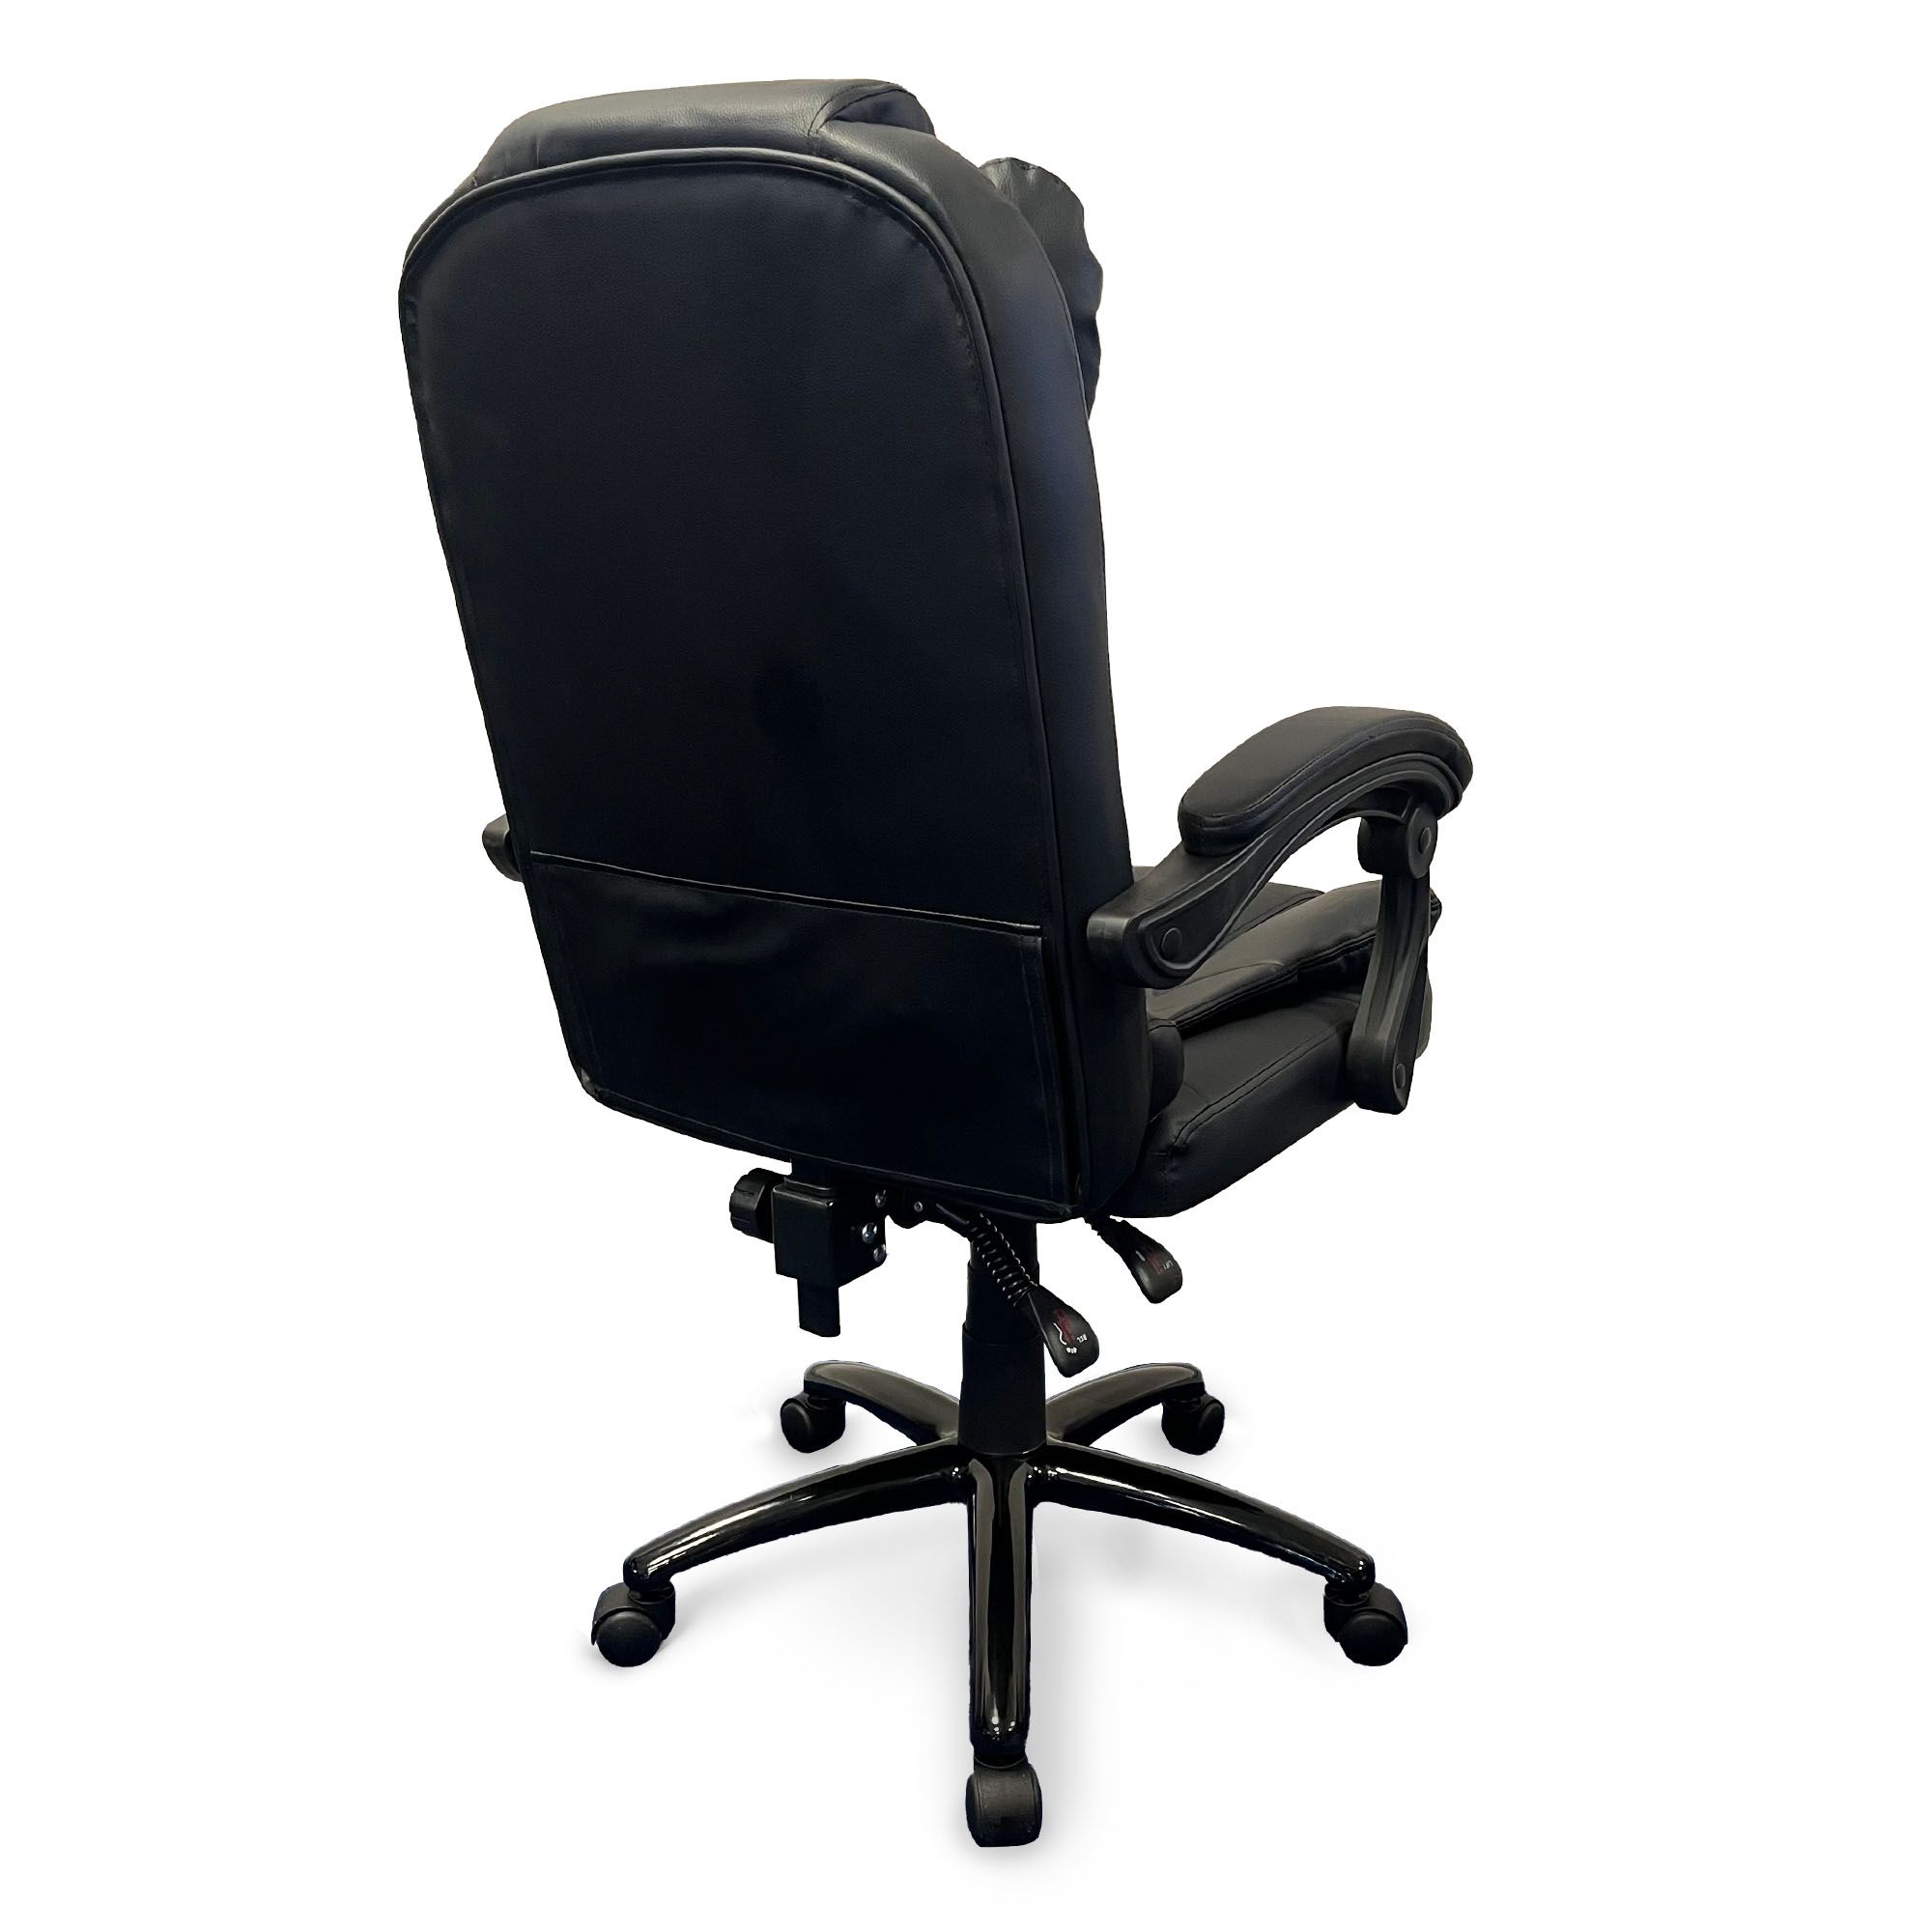 Ergodu Luxury Office Chair with Adjustable Backrest back view